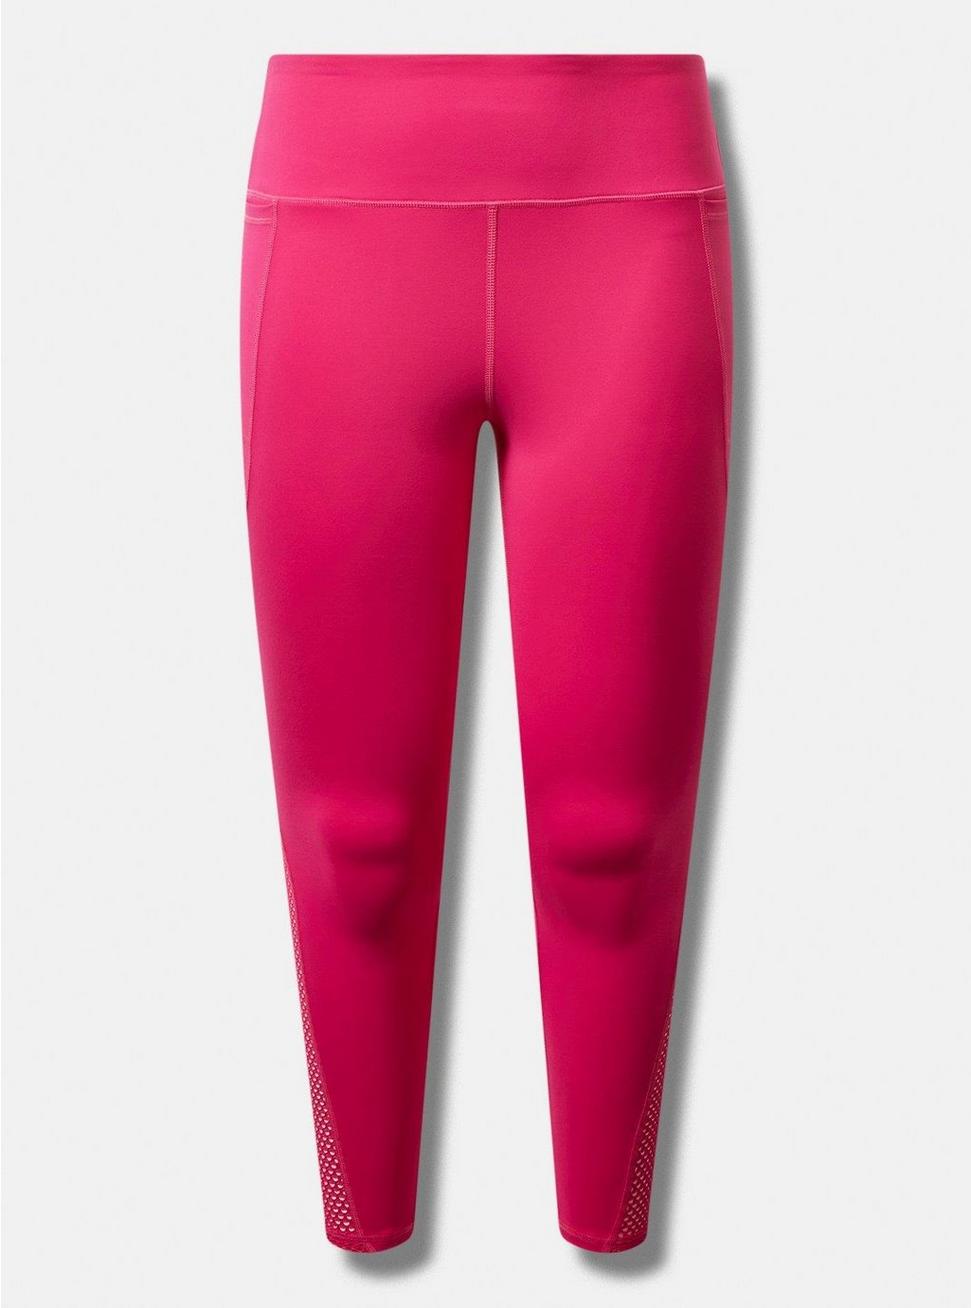 Performance Core Full Length Mesh Active Legging with High Pockets, PINK PEACOCK, hi-res